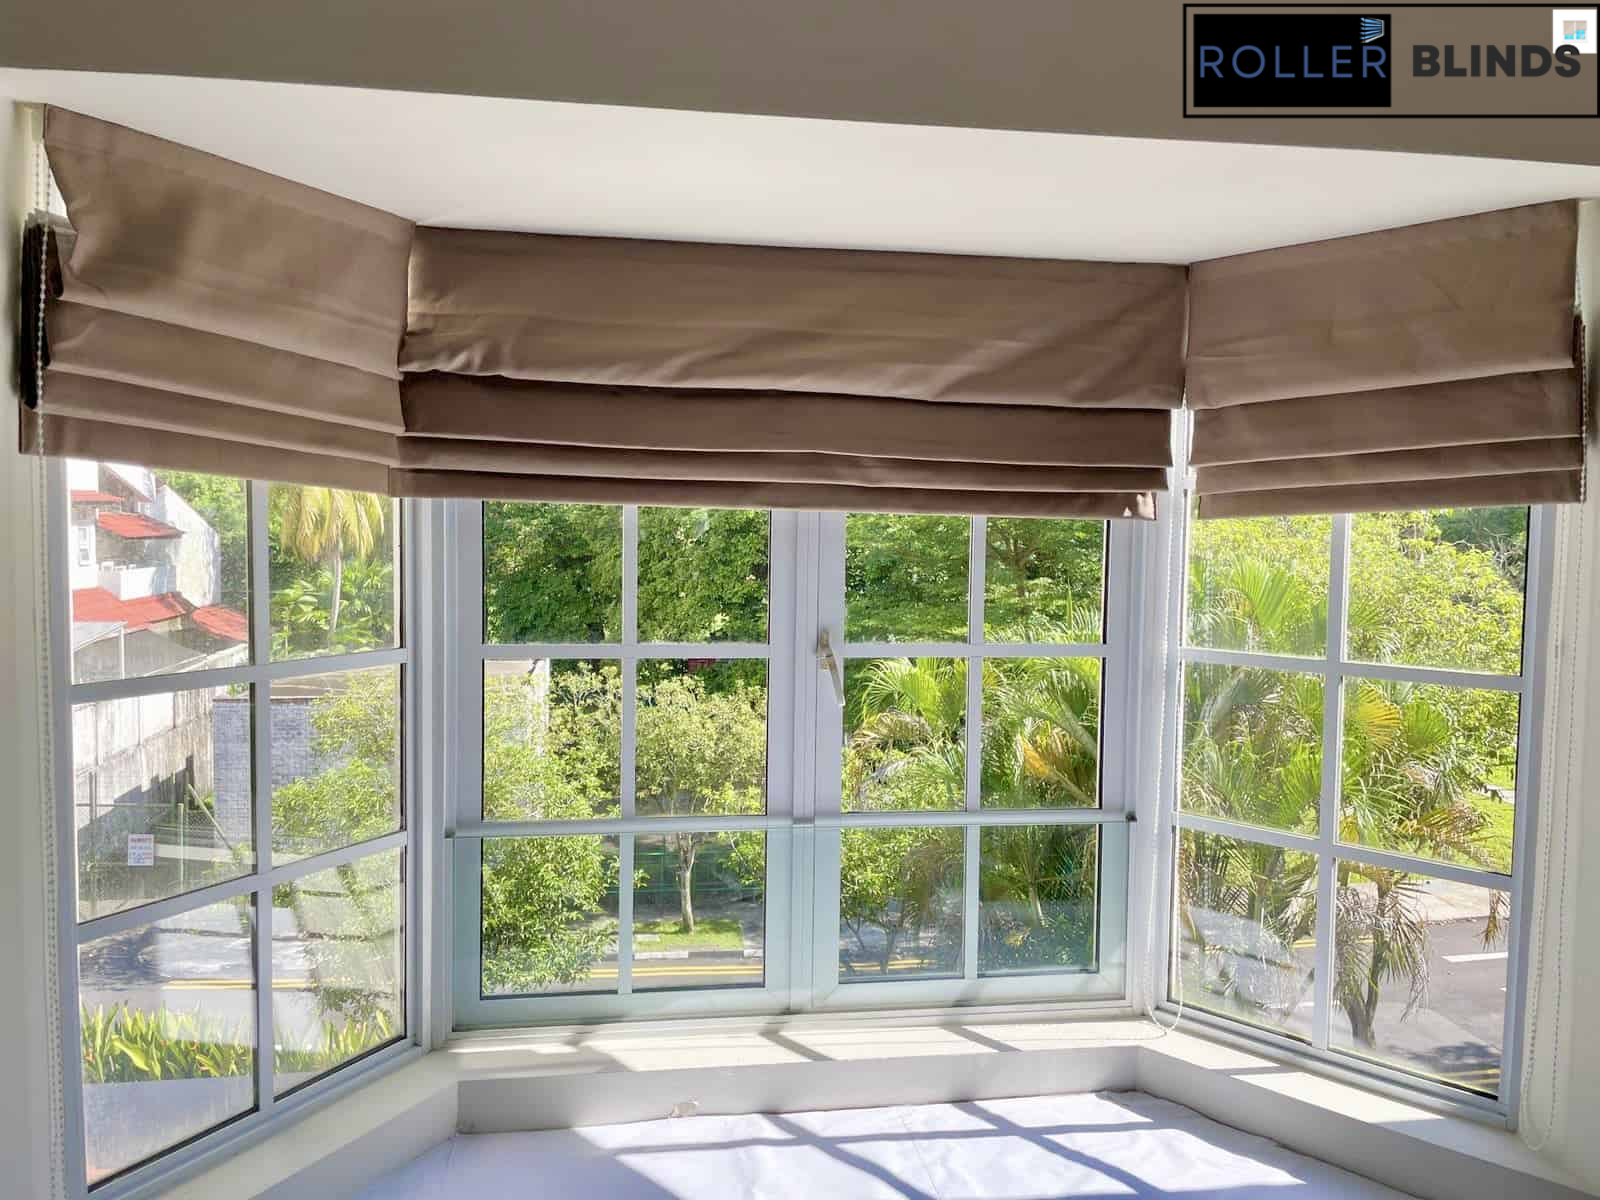 ROMAN BLINDS FOR YOUR HOME